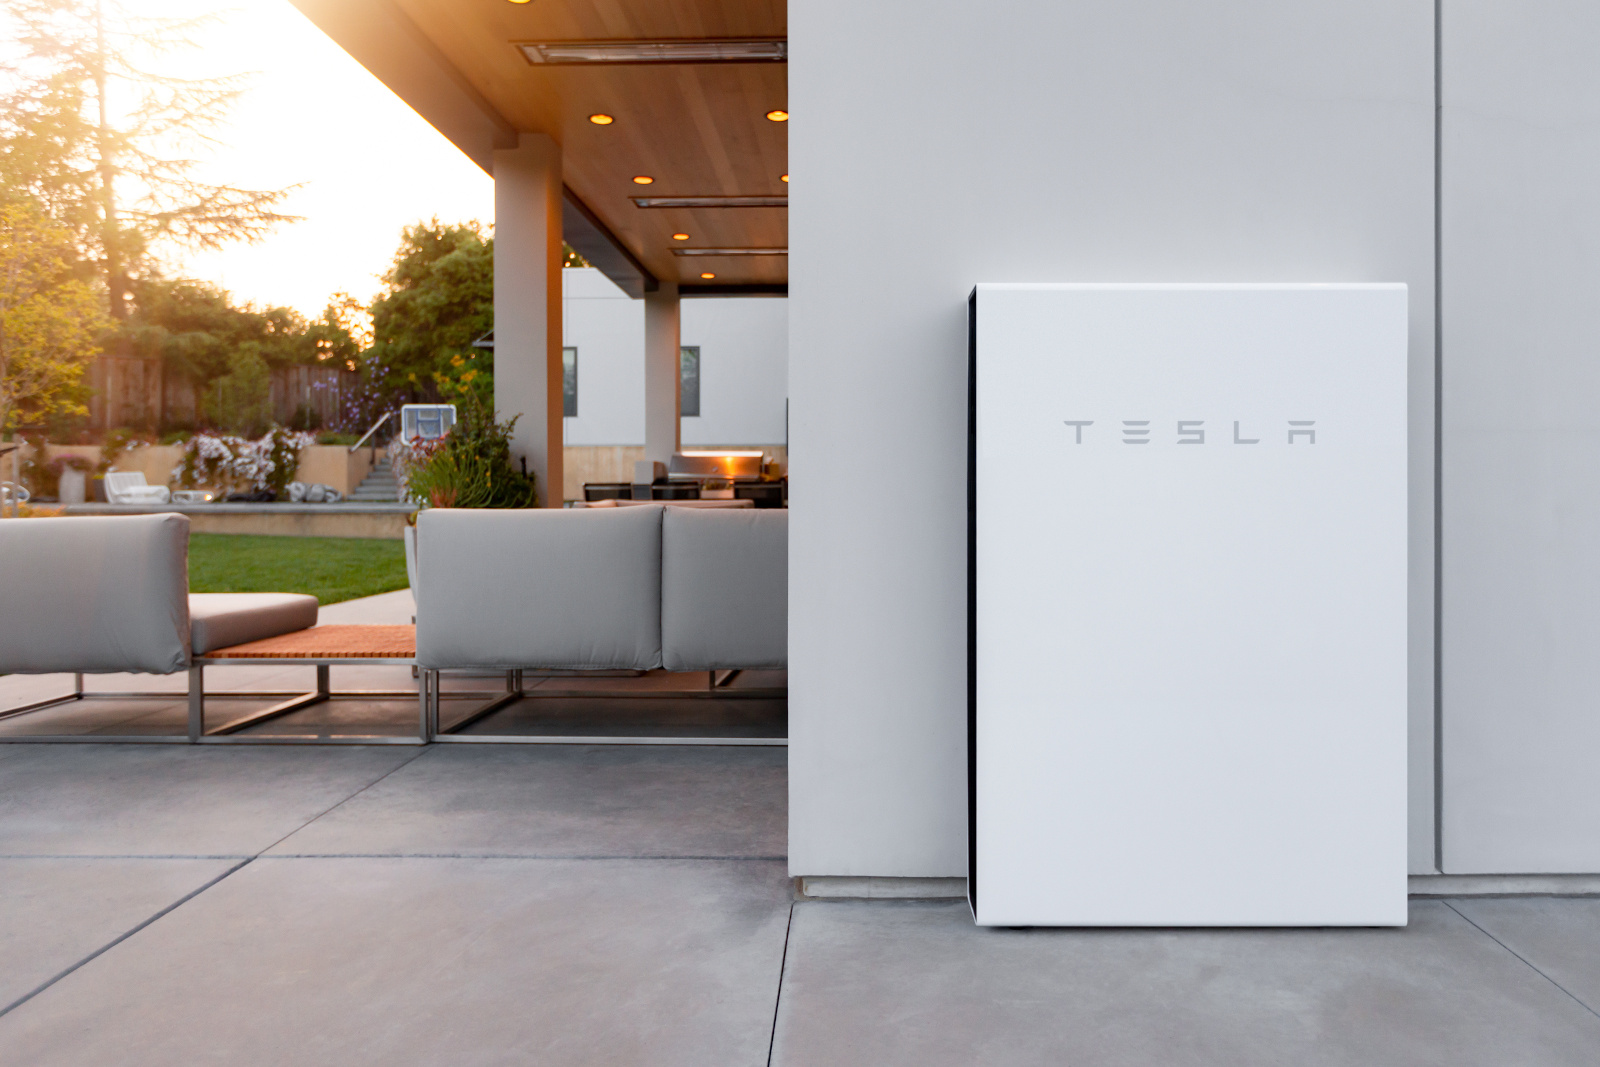 Tesla’s Powerwall+ is a increased-strength battery for off-grid residing